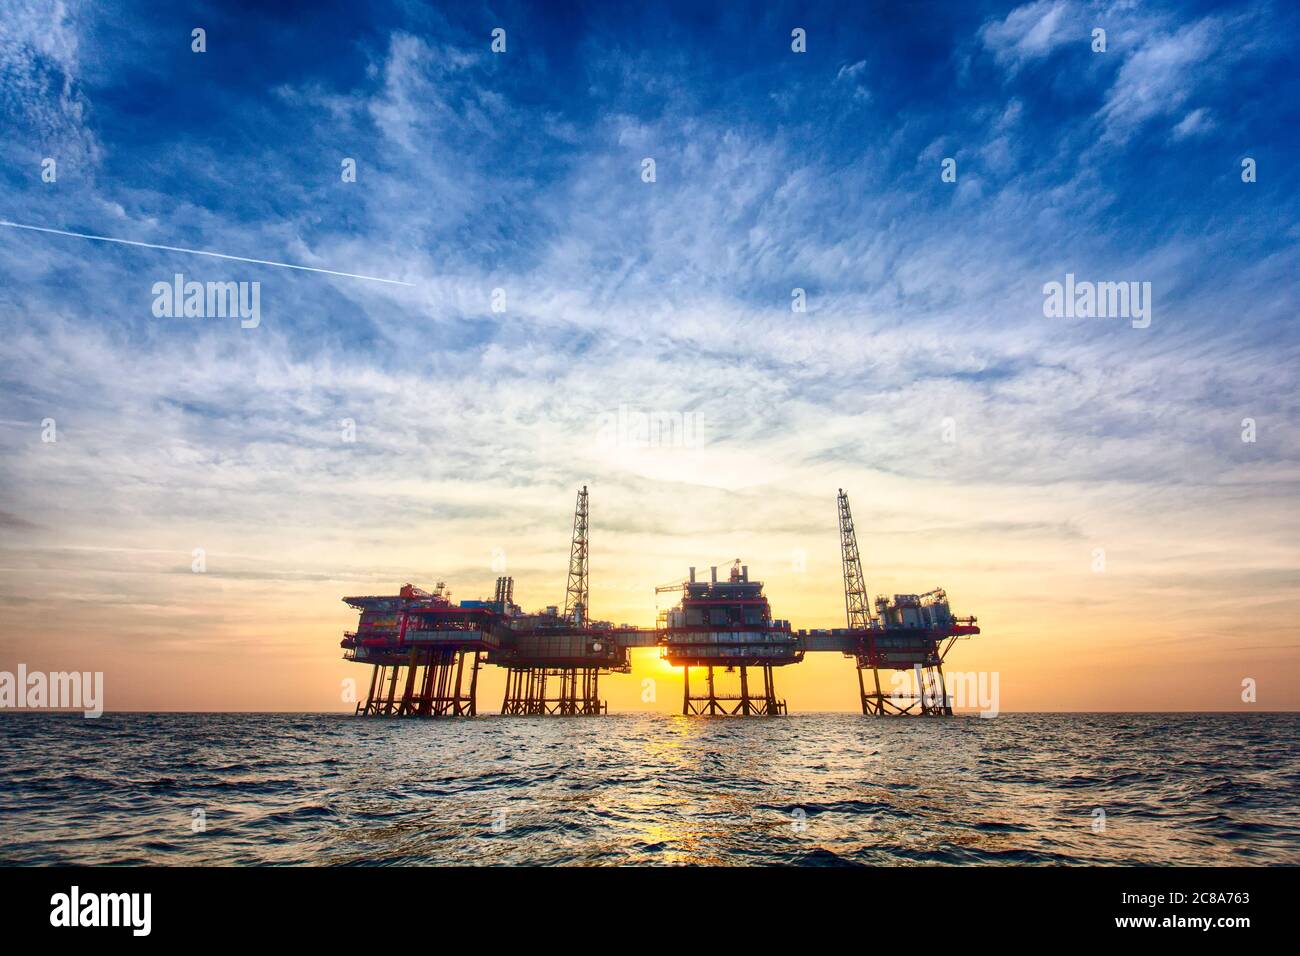 Offshore oil platform at sunset time Stock Photo